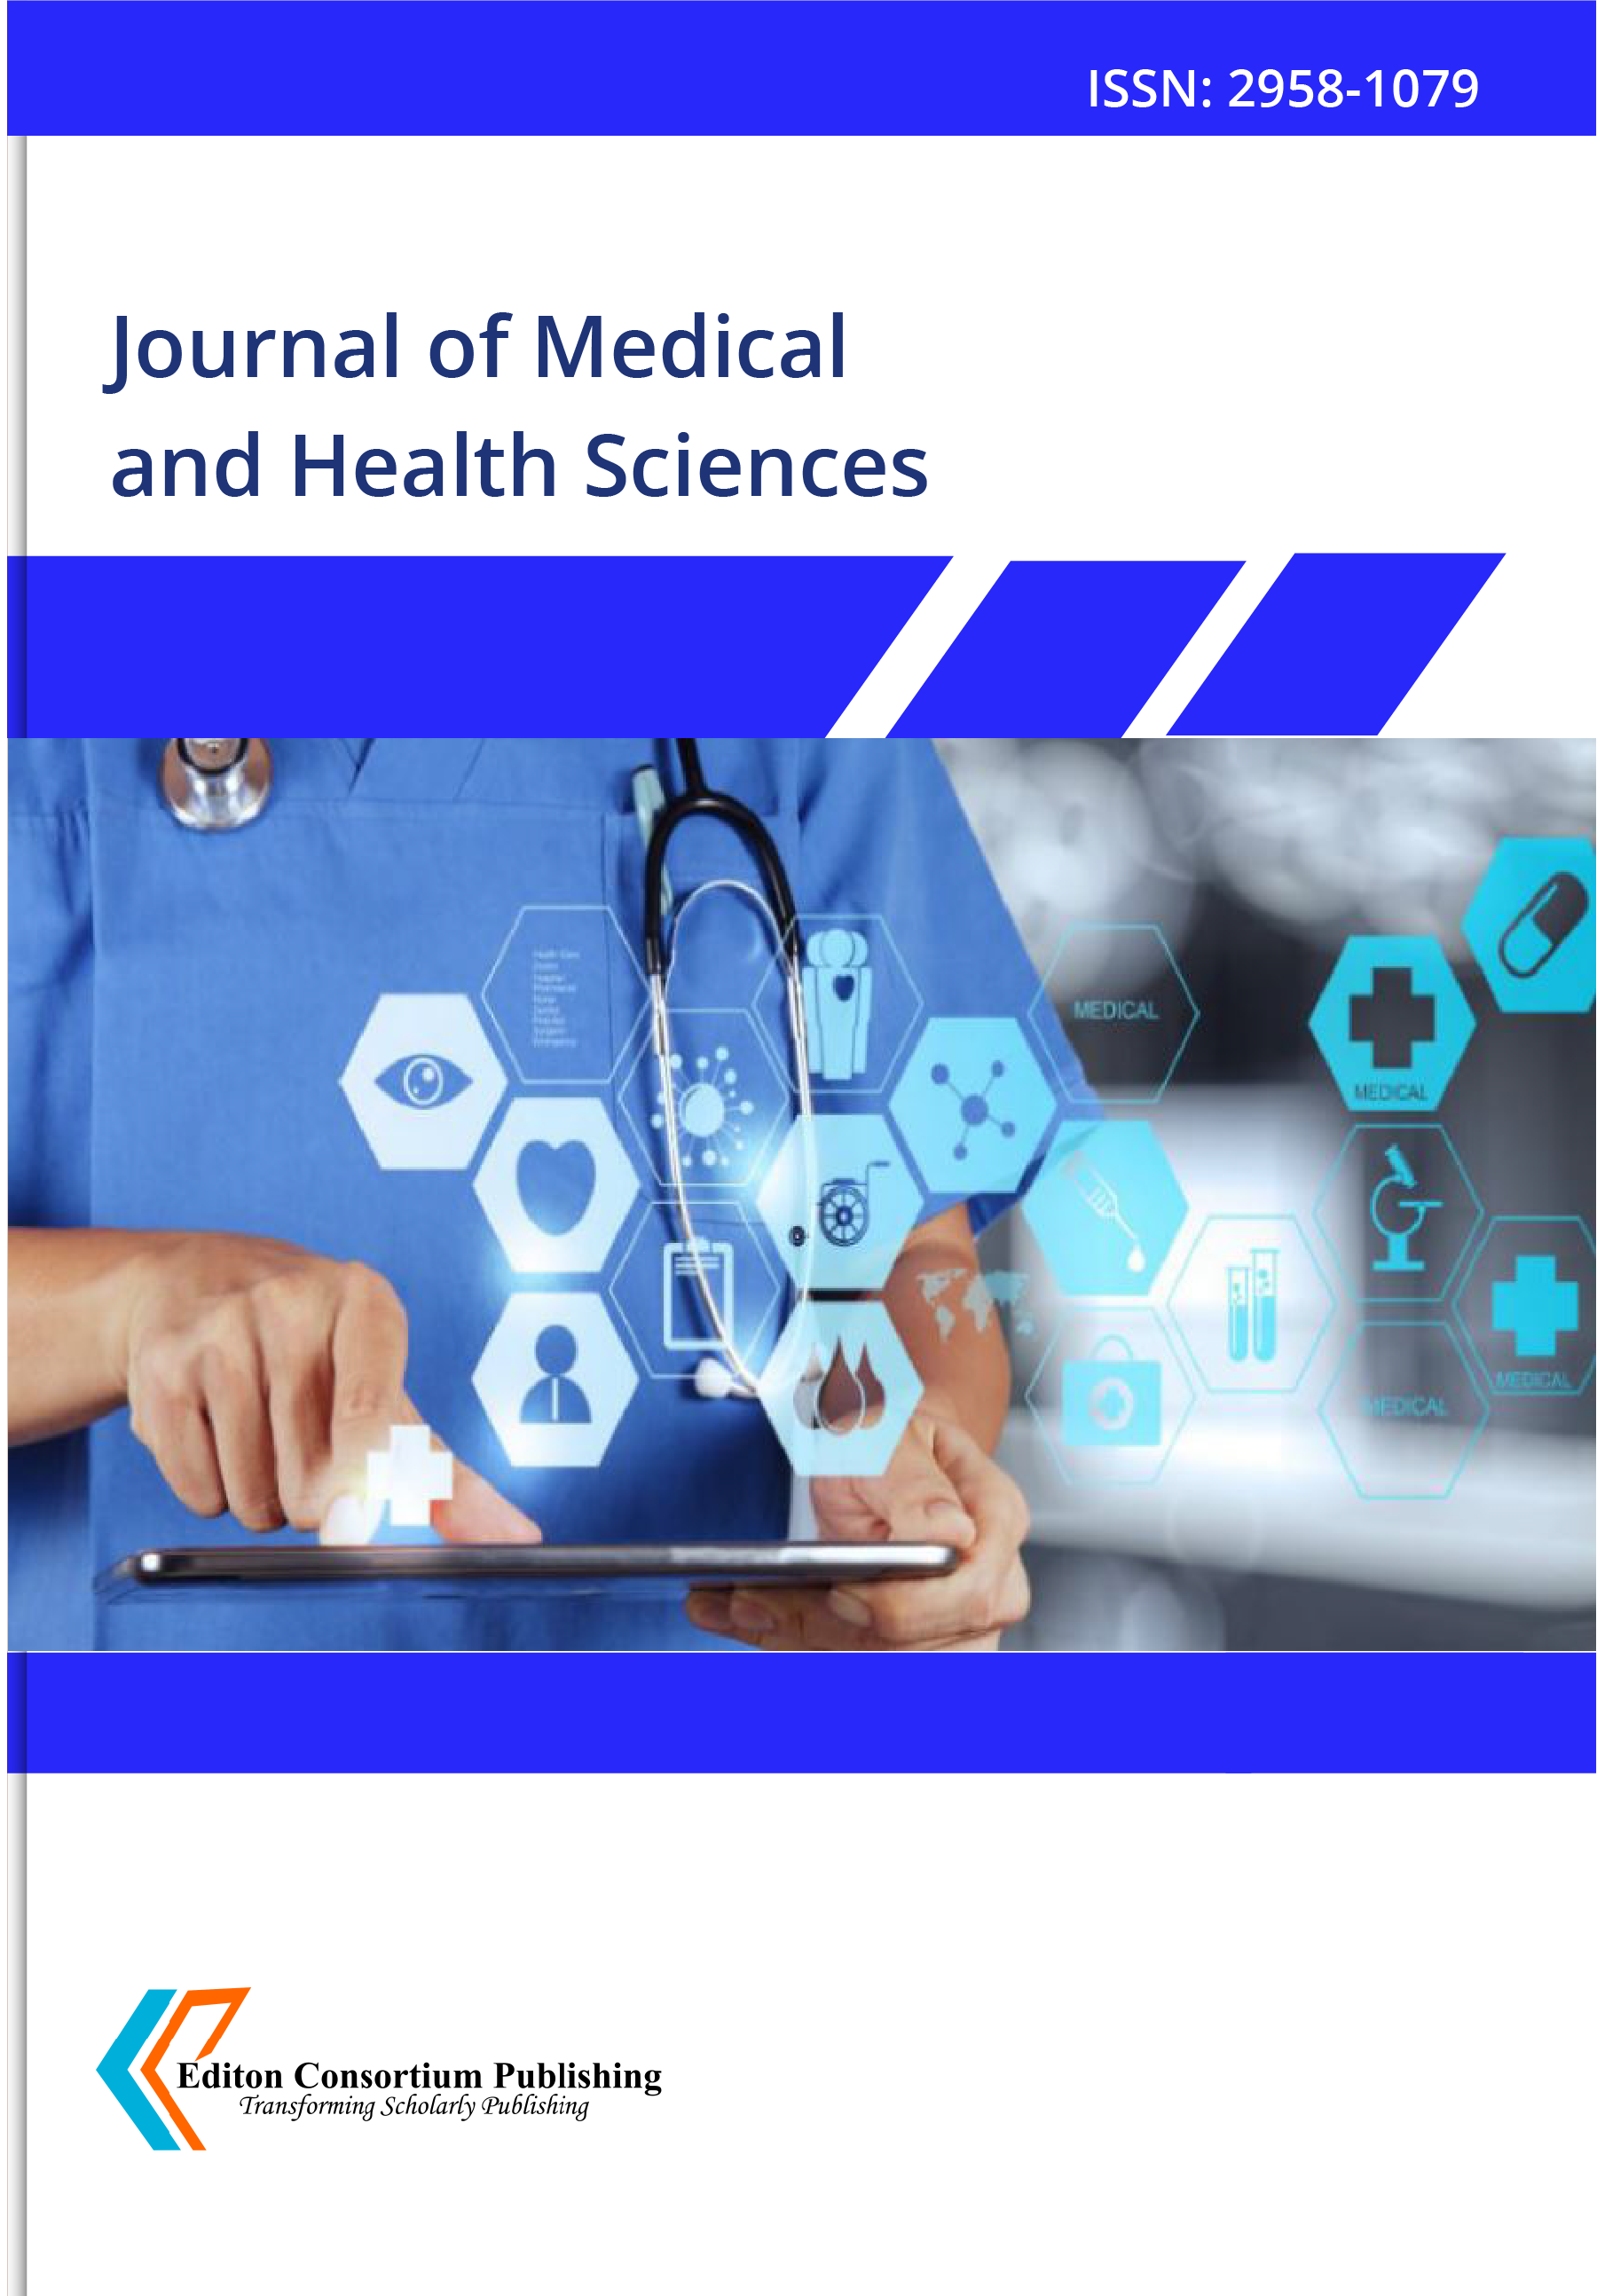  Journal of Medical and Health Sciences